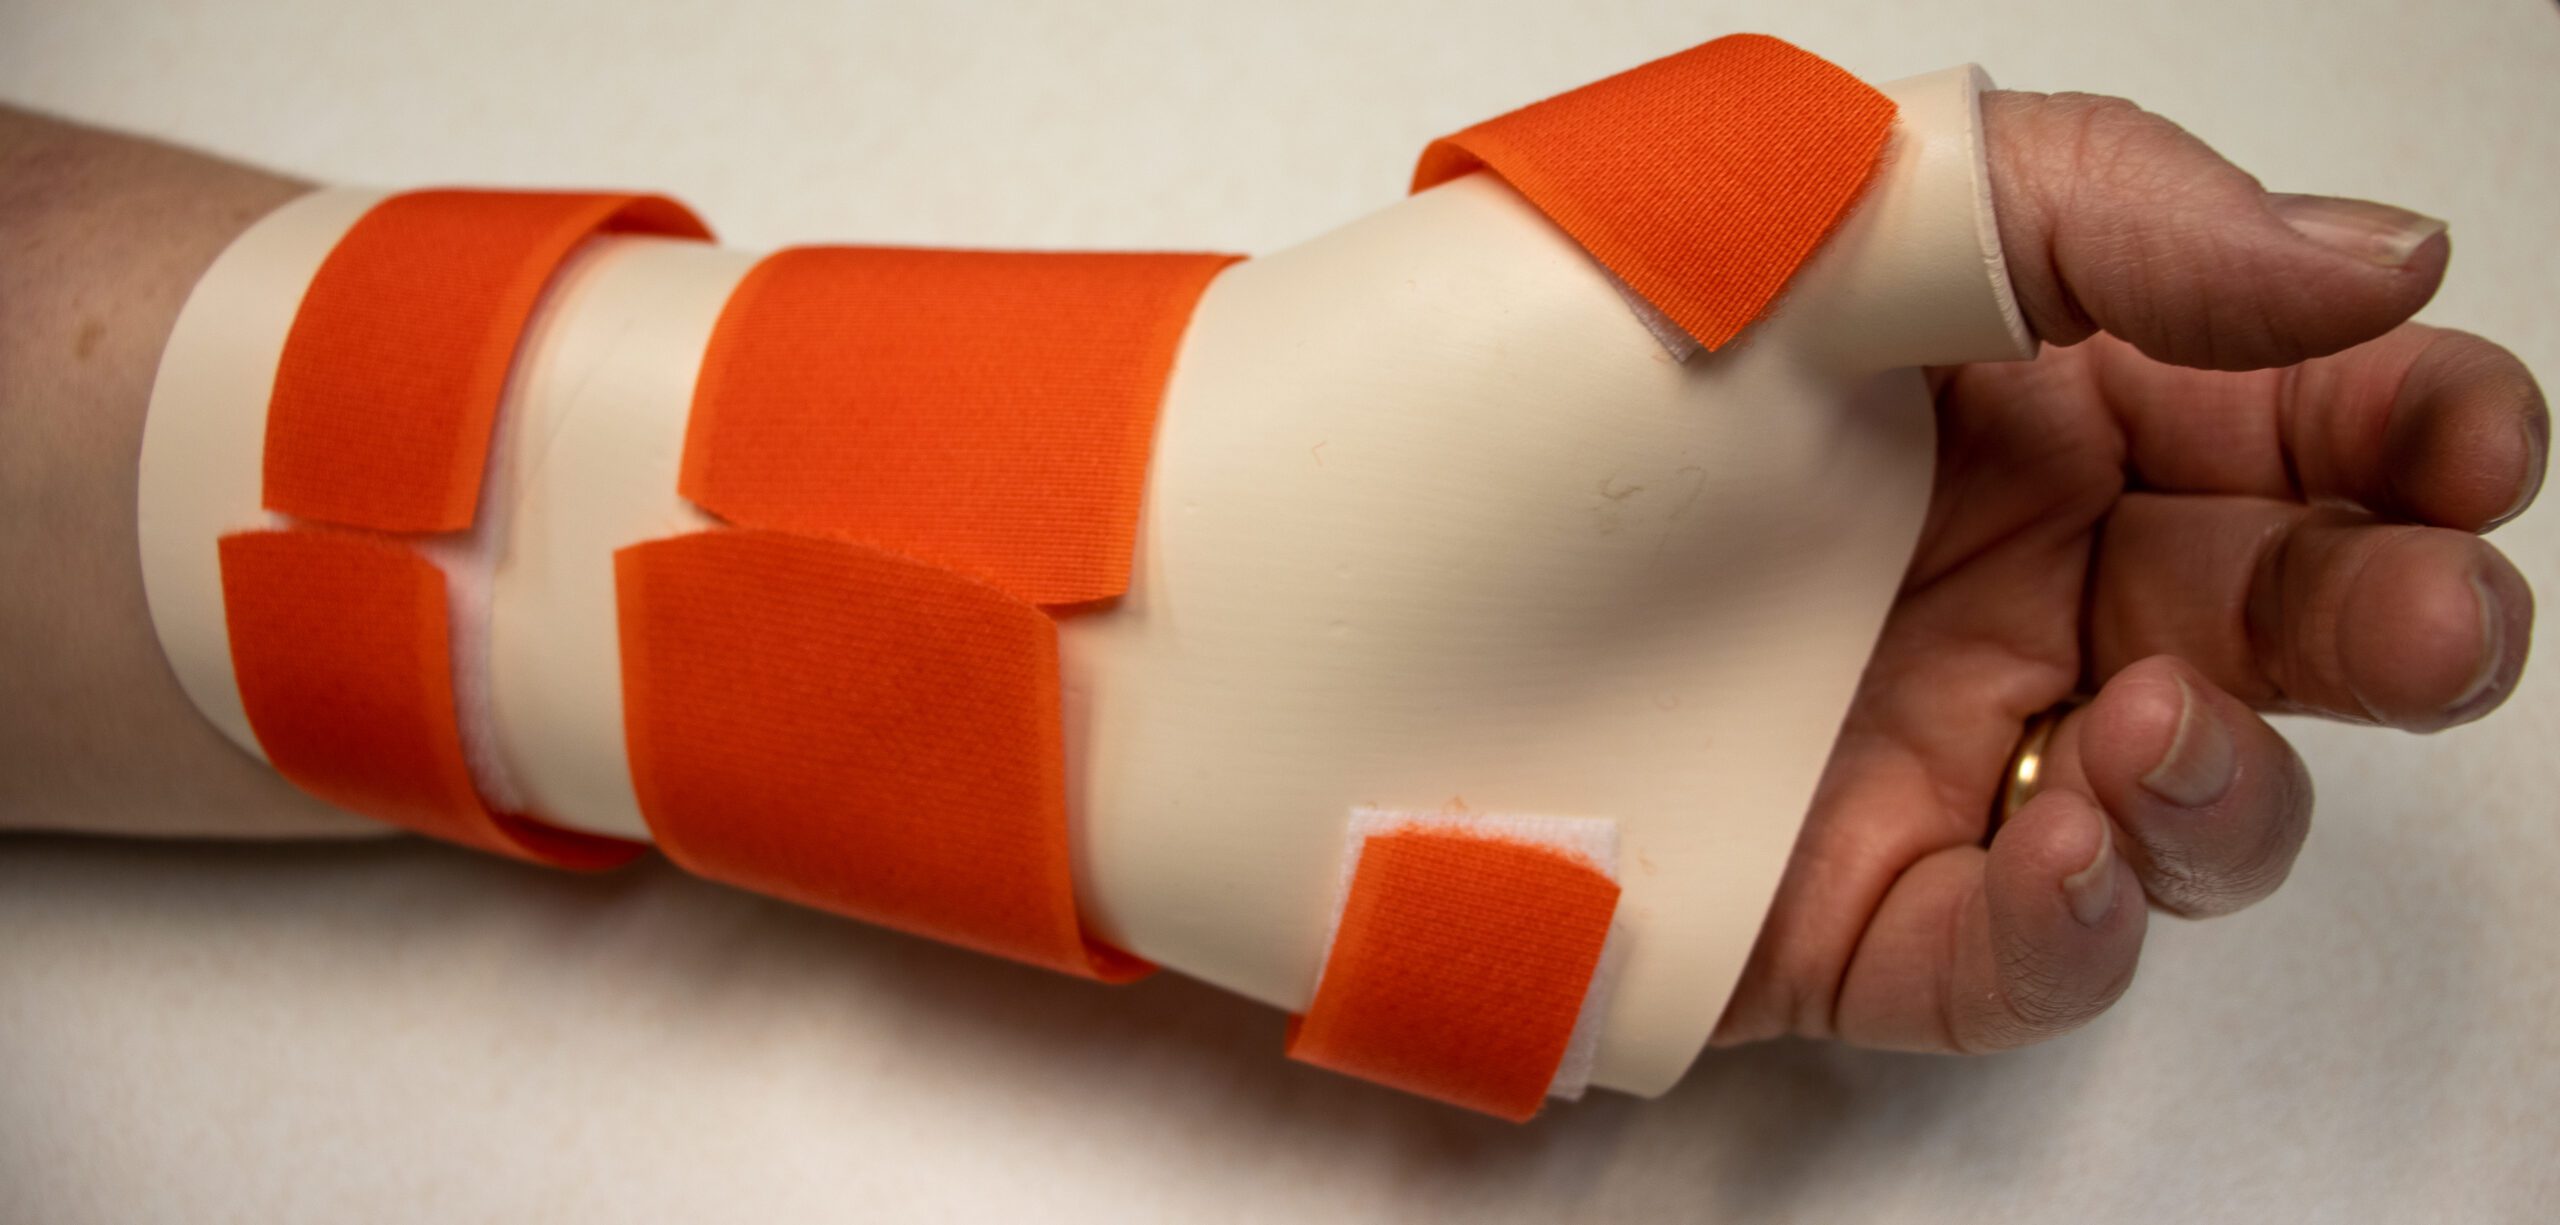 A picture of a patient wearing a hand splint for occupational therapy rehabilitation at STAR Physical Therapy.